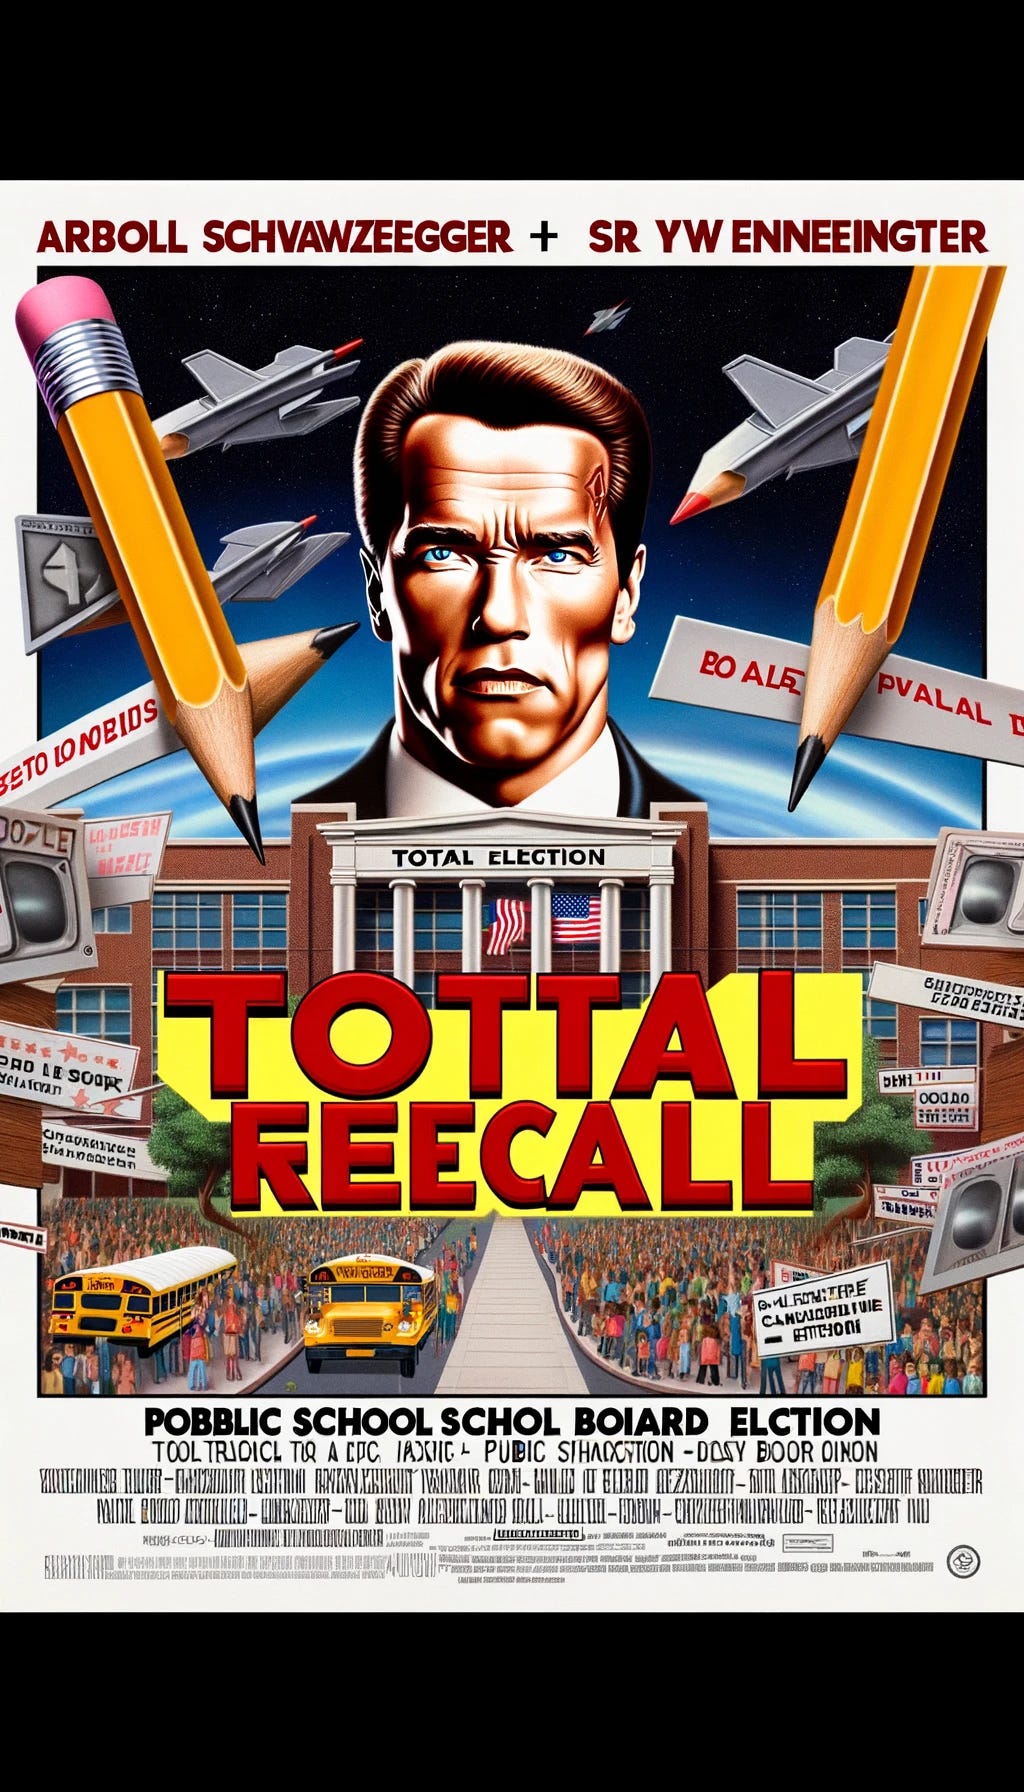 Movie poster in the style of 'Total Recall' starring Arnold Schwarzenegger, but reimagined for a public school board election theme. Instead of futuristic elements, the poster features imagery like school buildings, pencils, and ballot boxes. The title 'Total Recall' is replaced with 'Total Election', and the background hints at a school setting.